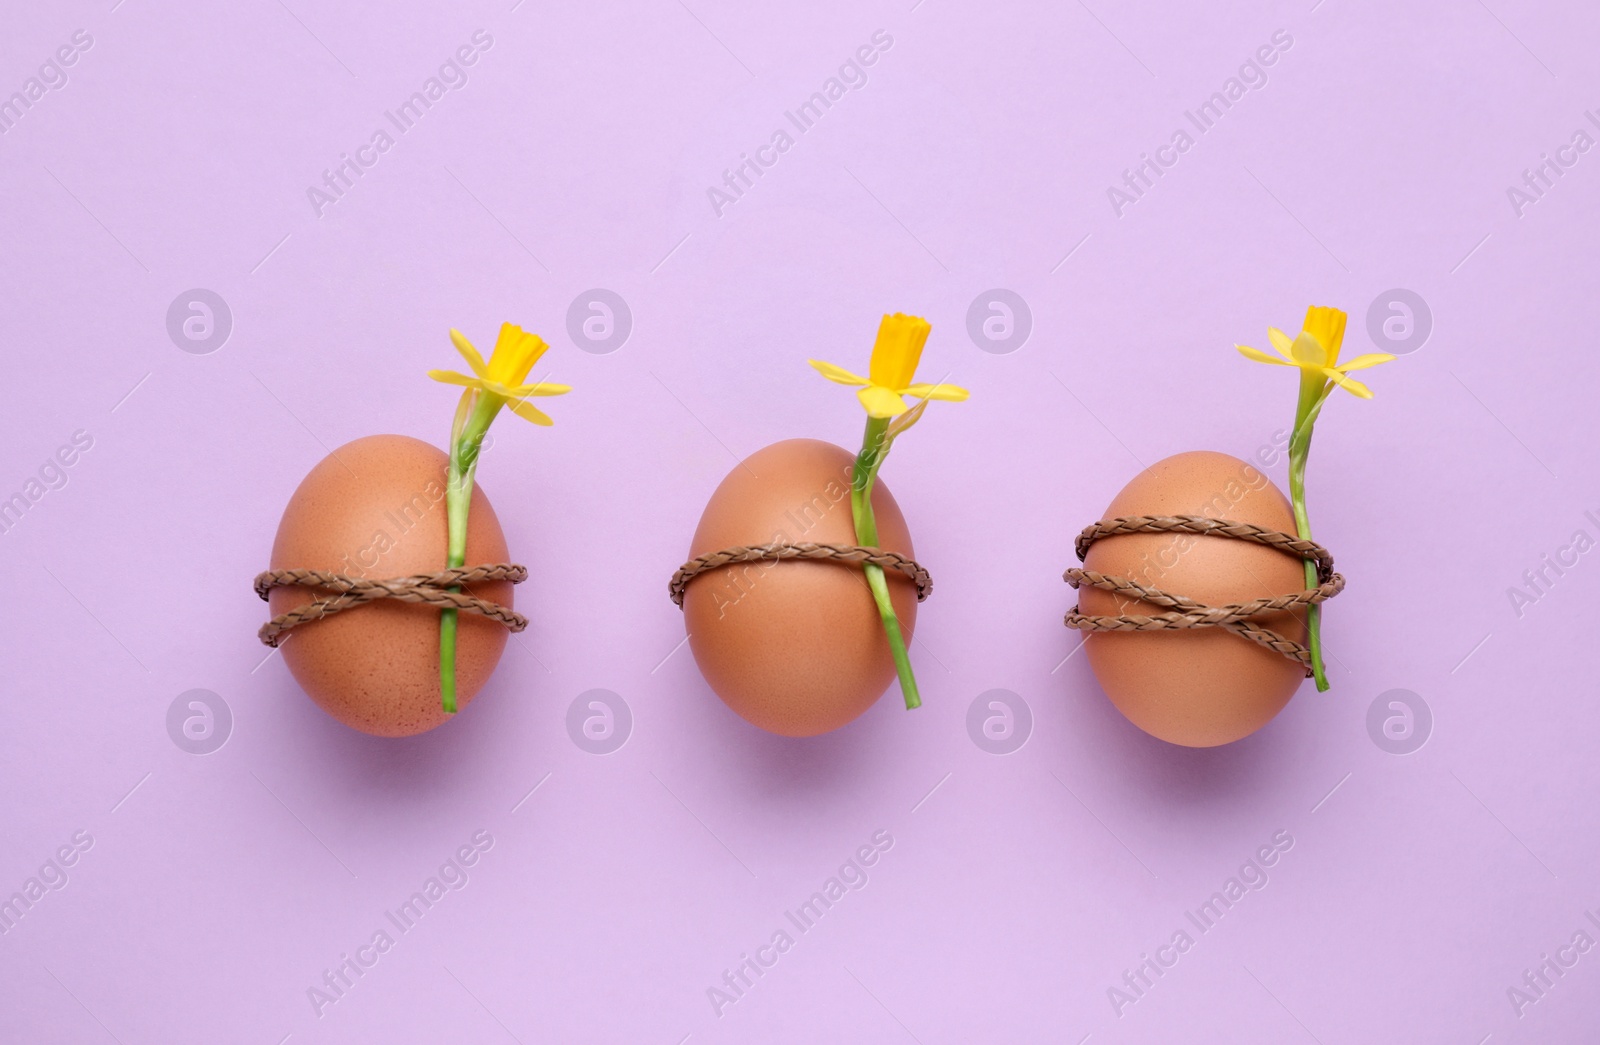 Photo of Easter eggs decorated with flowers on lilac background, top view